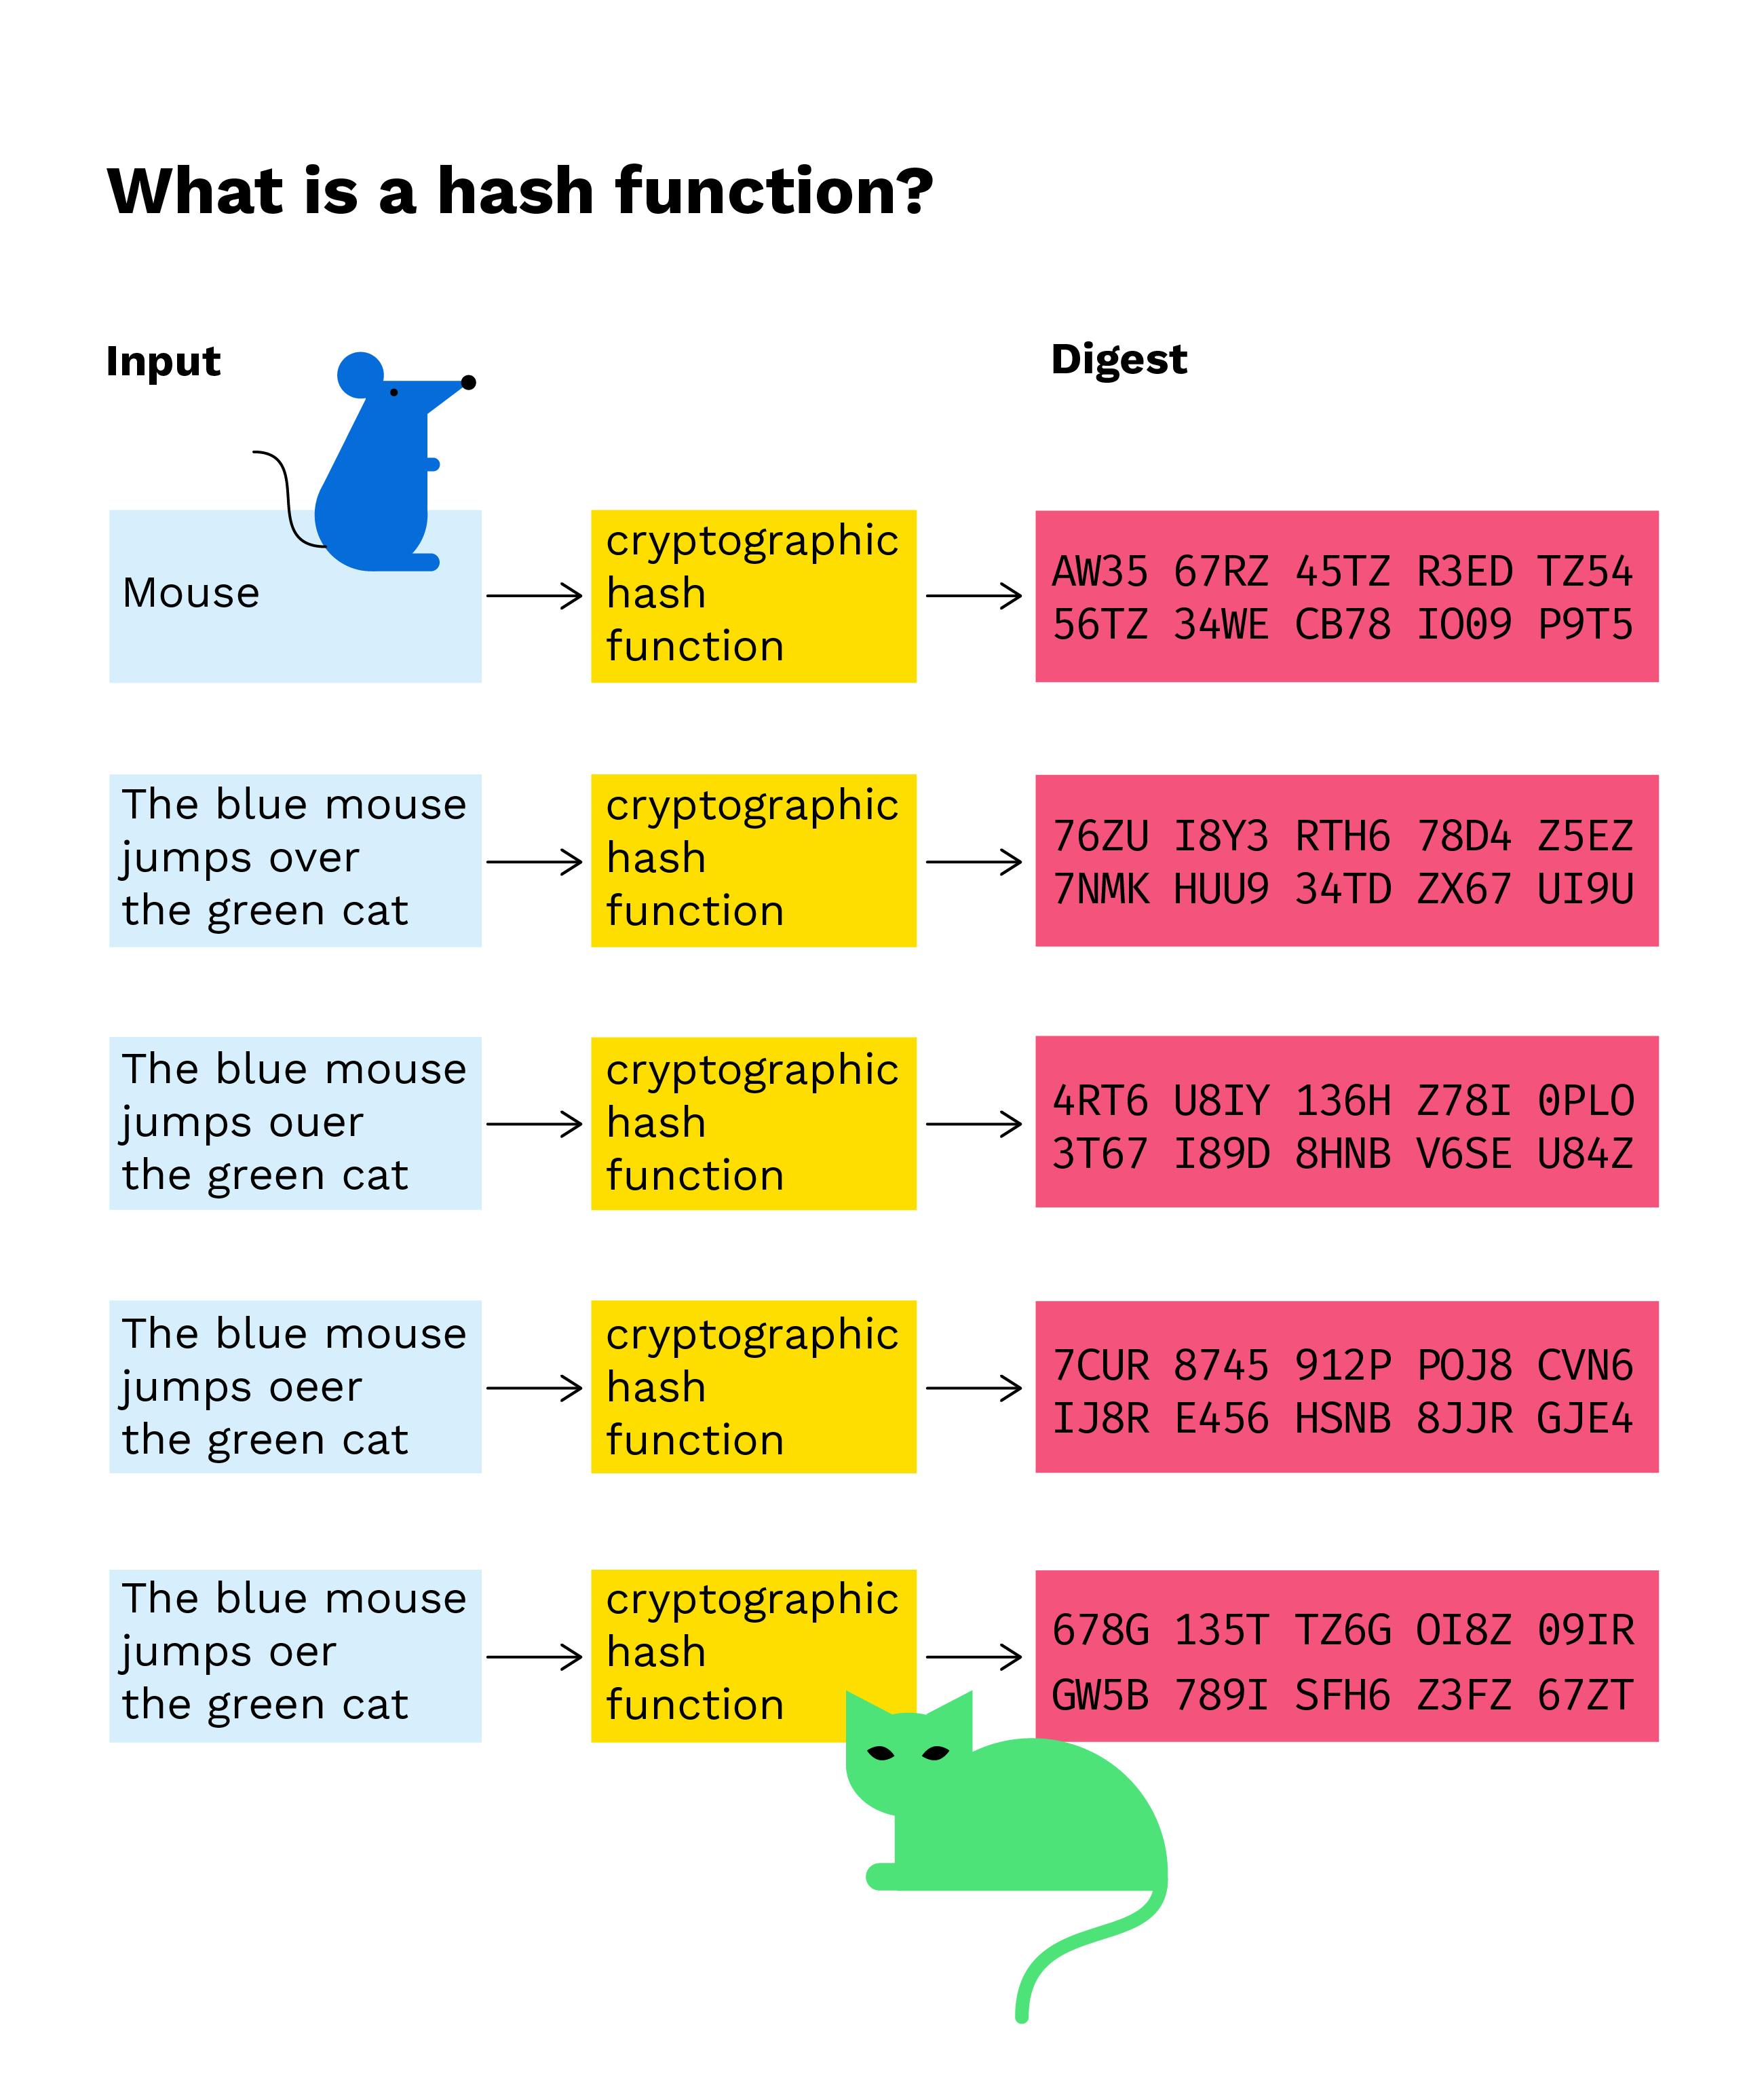 Cryptographic Hash Functions: Definition and Examples